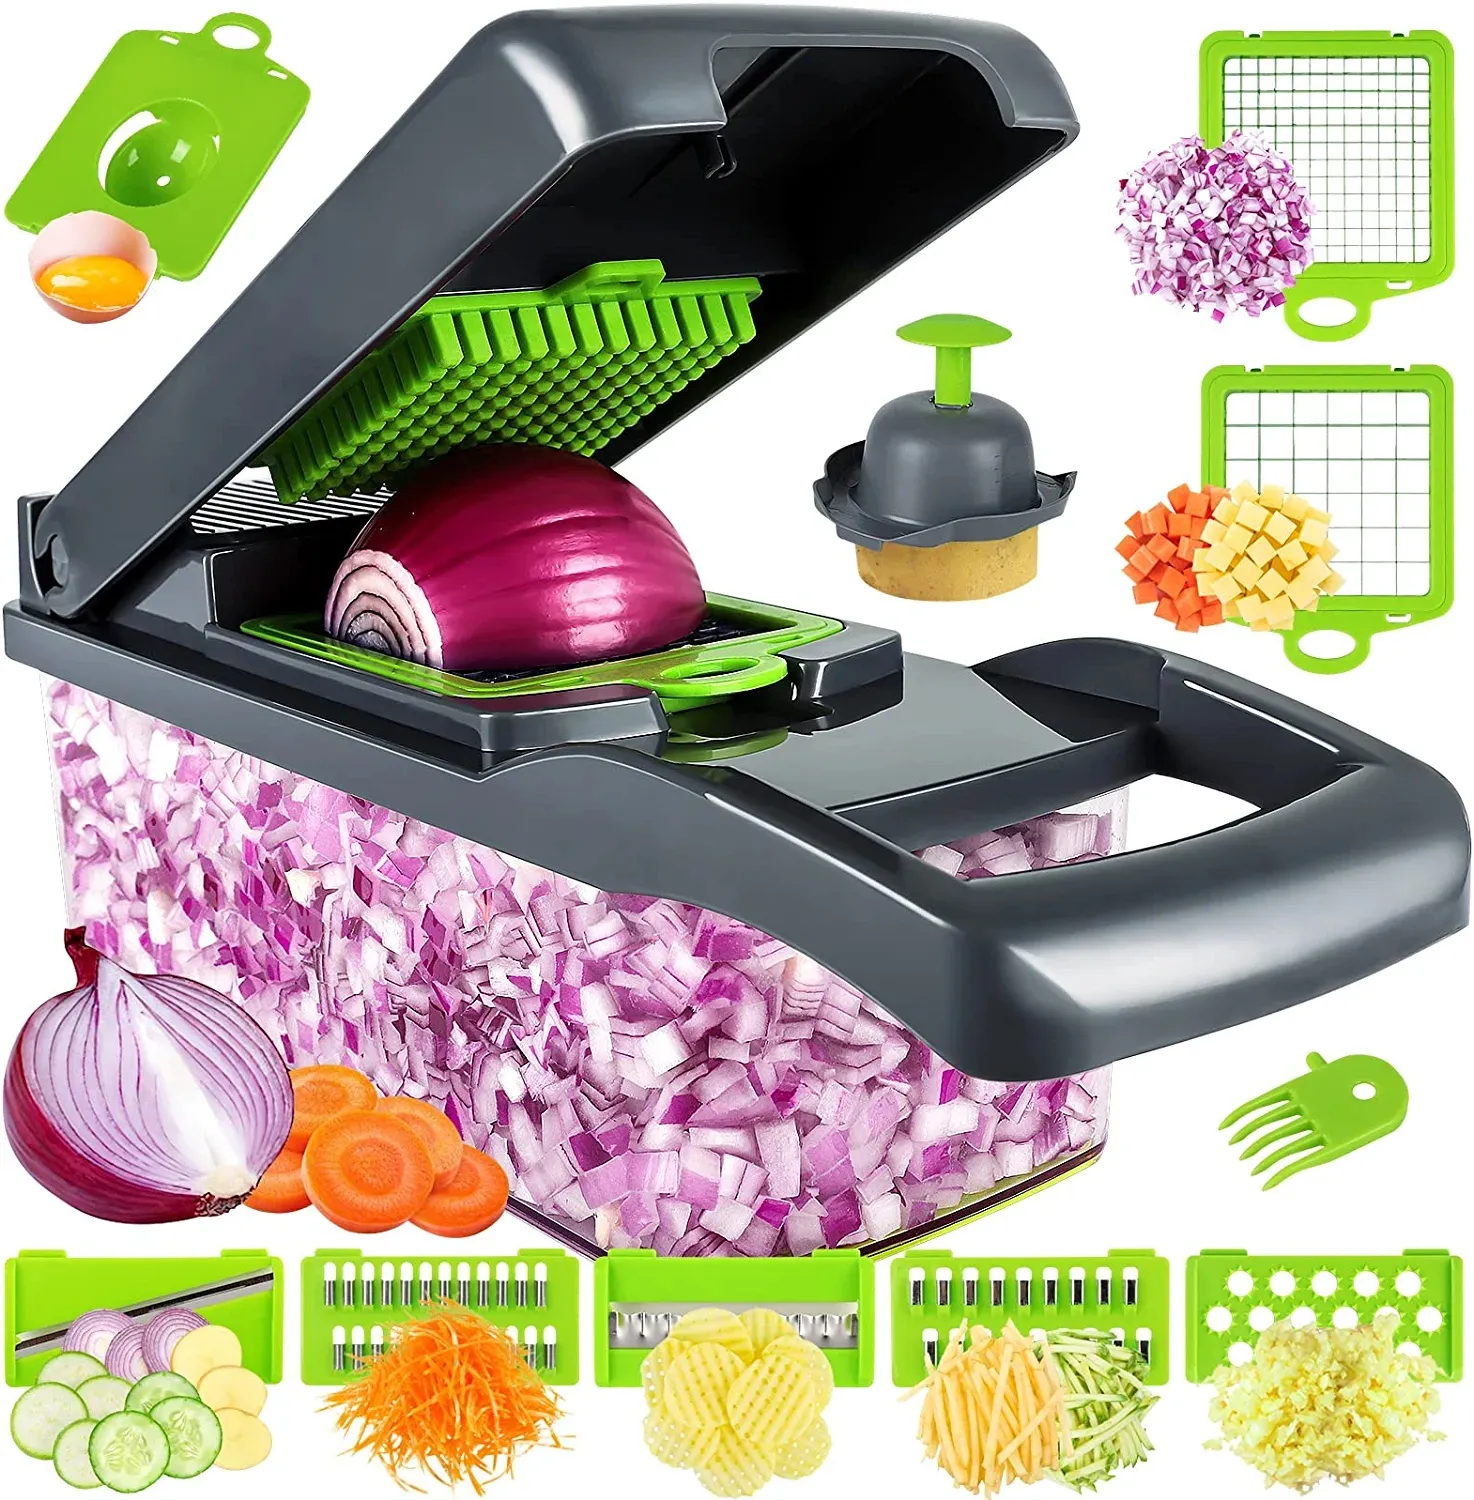 Adjustable Vegetable Cutter Vegetable Onion Chopper 16 in 1 multifunctional Food Chopper with 8 Blades Slicer Dicer Cutter & Dic